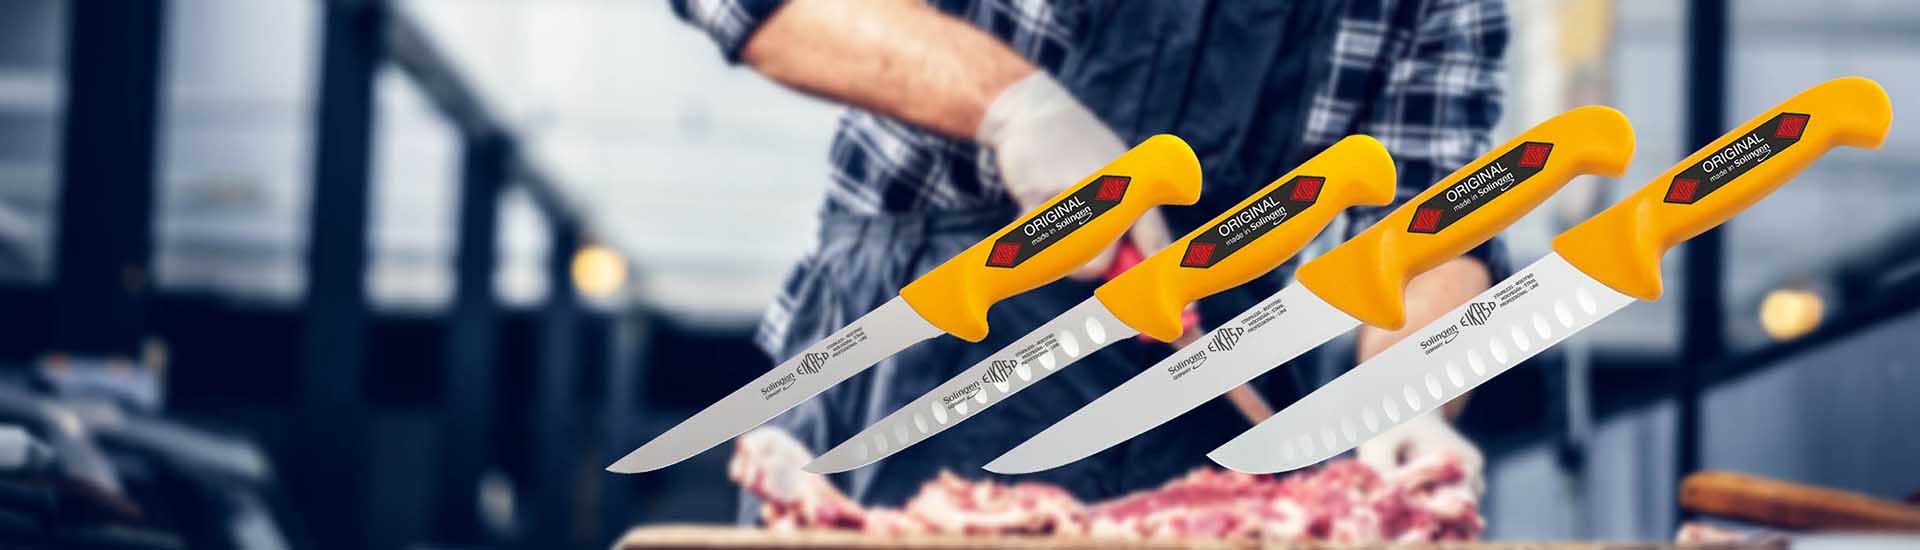 Eikaso Meat Knives and Butcher Knives - Quality for Professional Demands